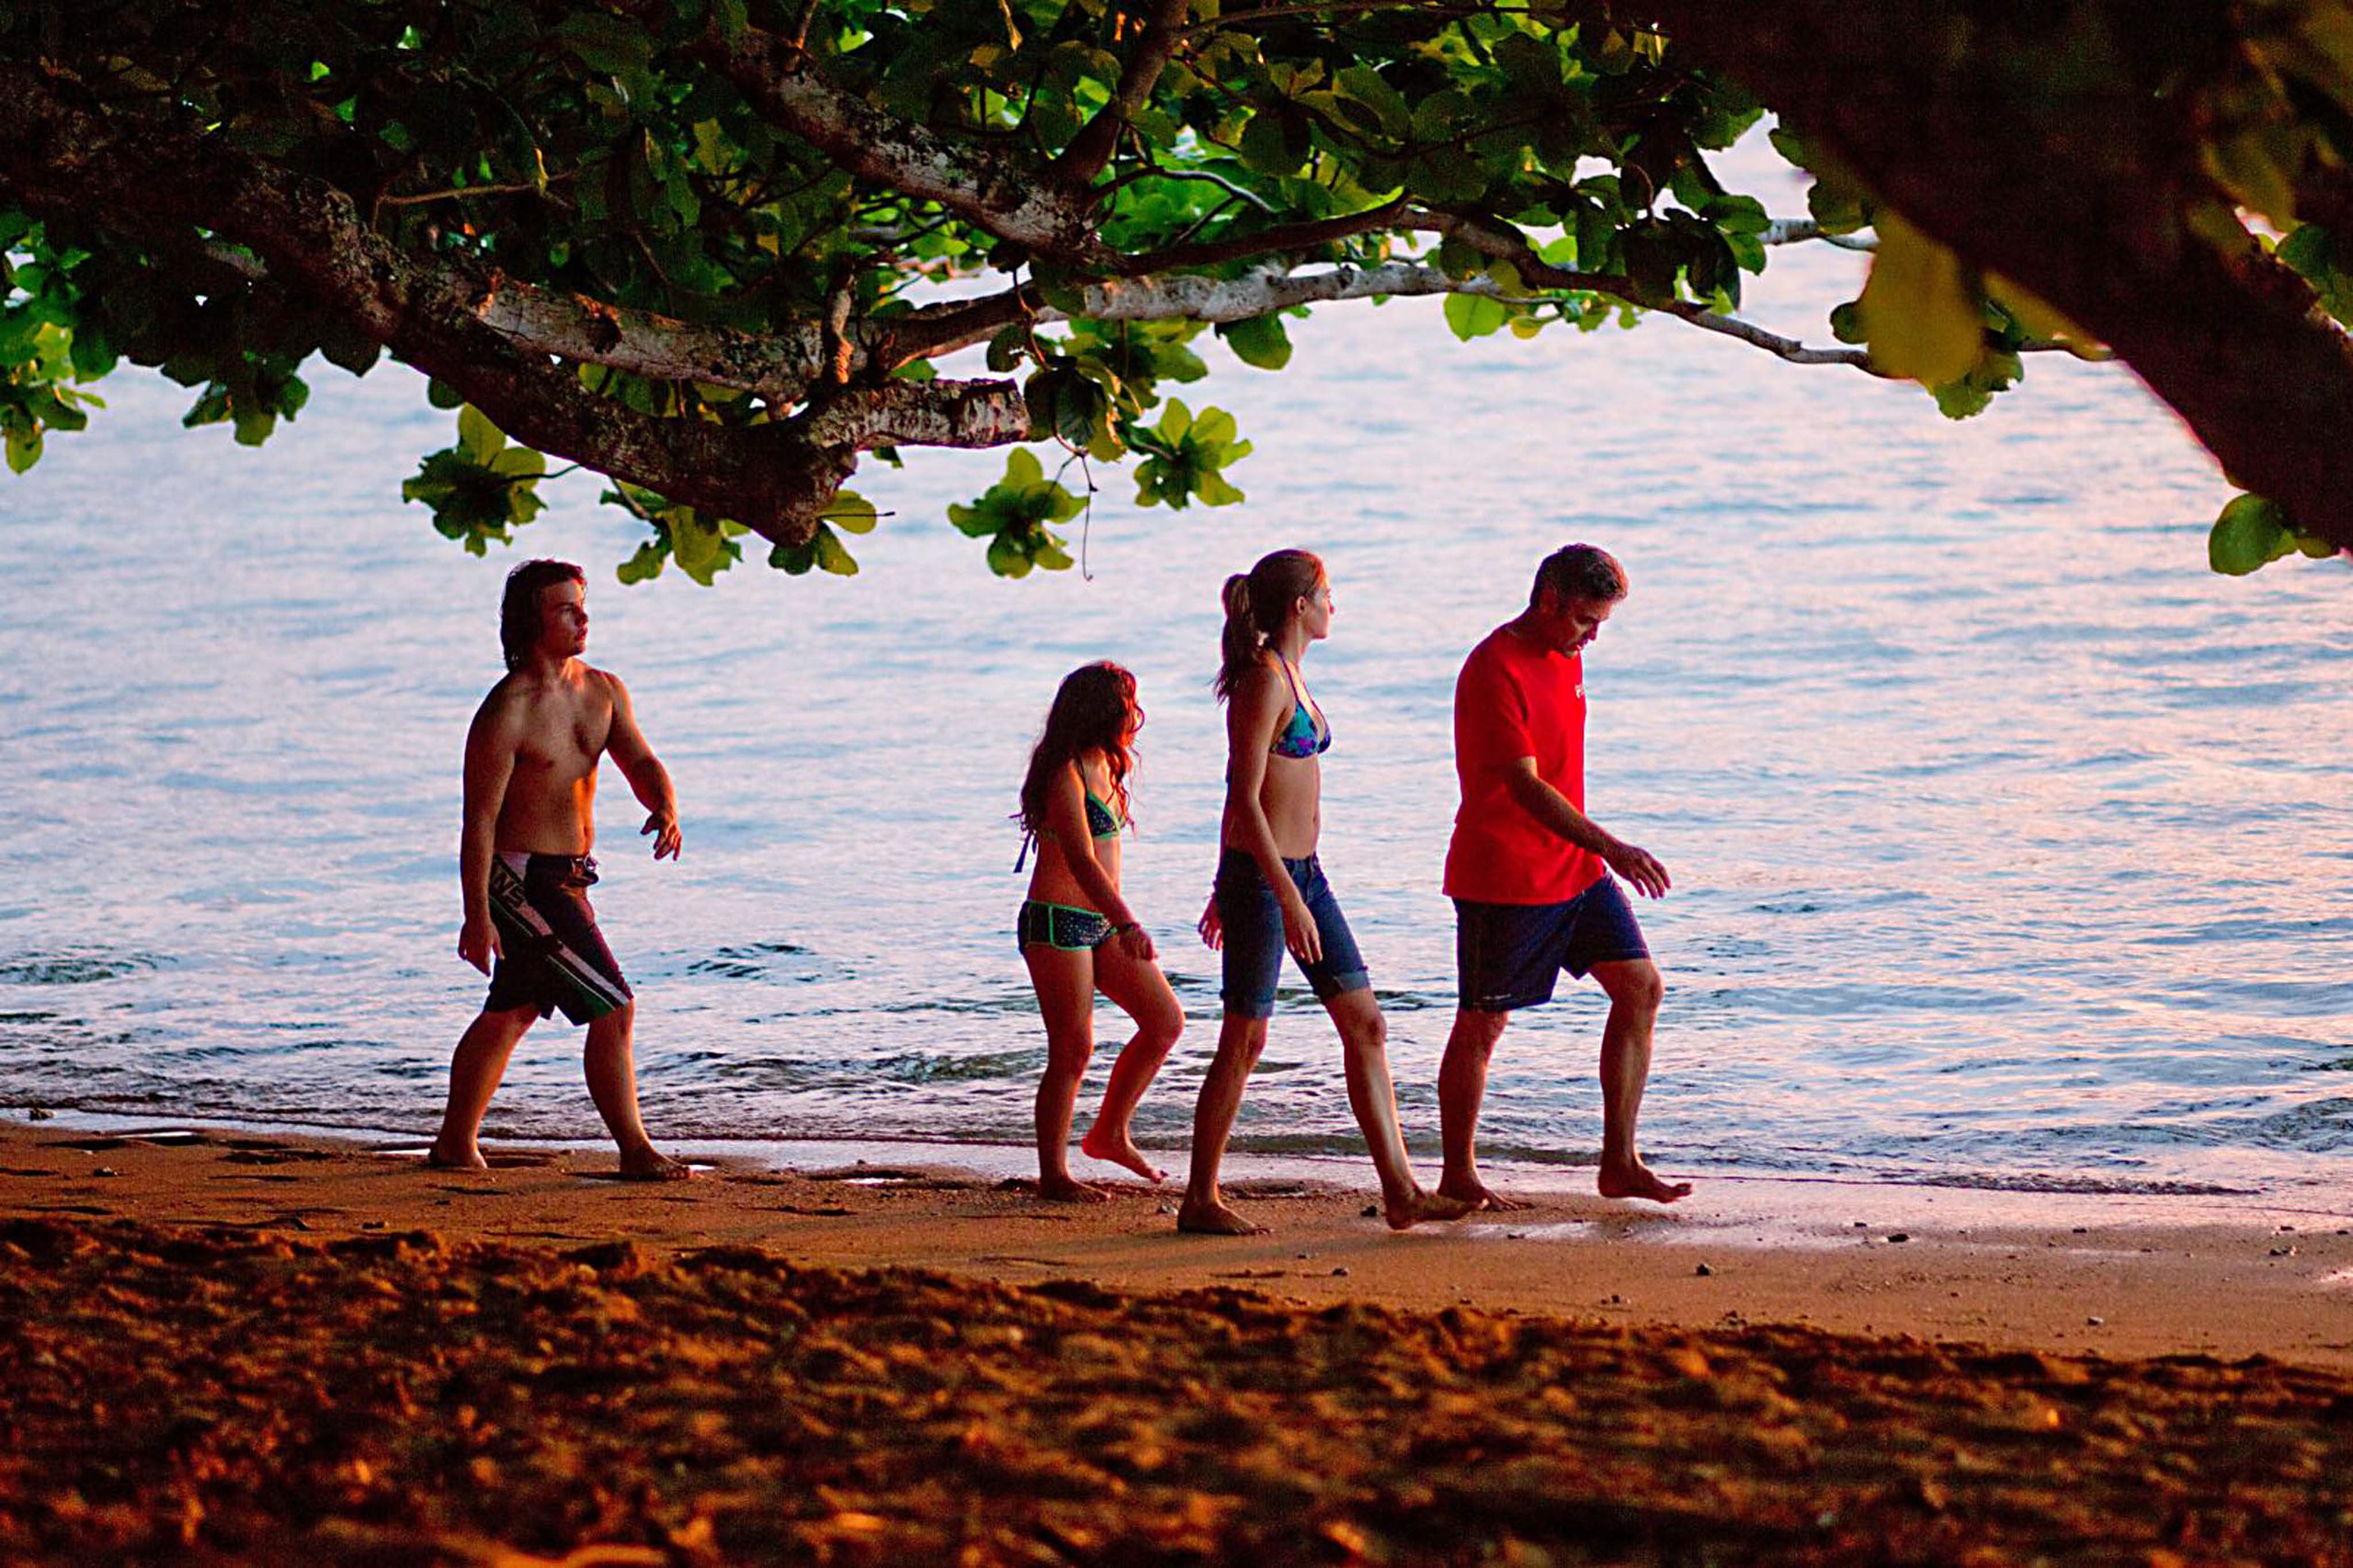 michael fassbender, Jessica Chastain, The Tree of Life, The Descendants